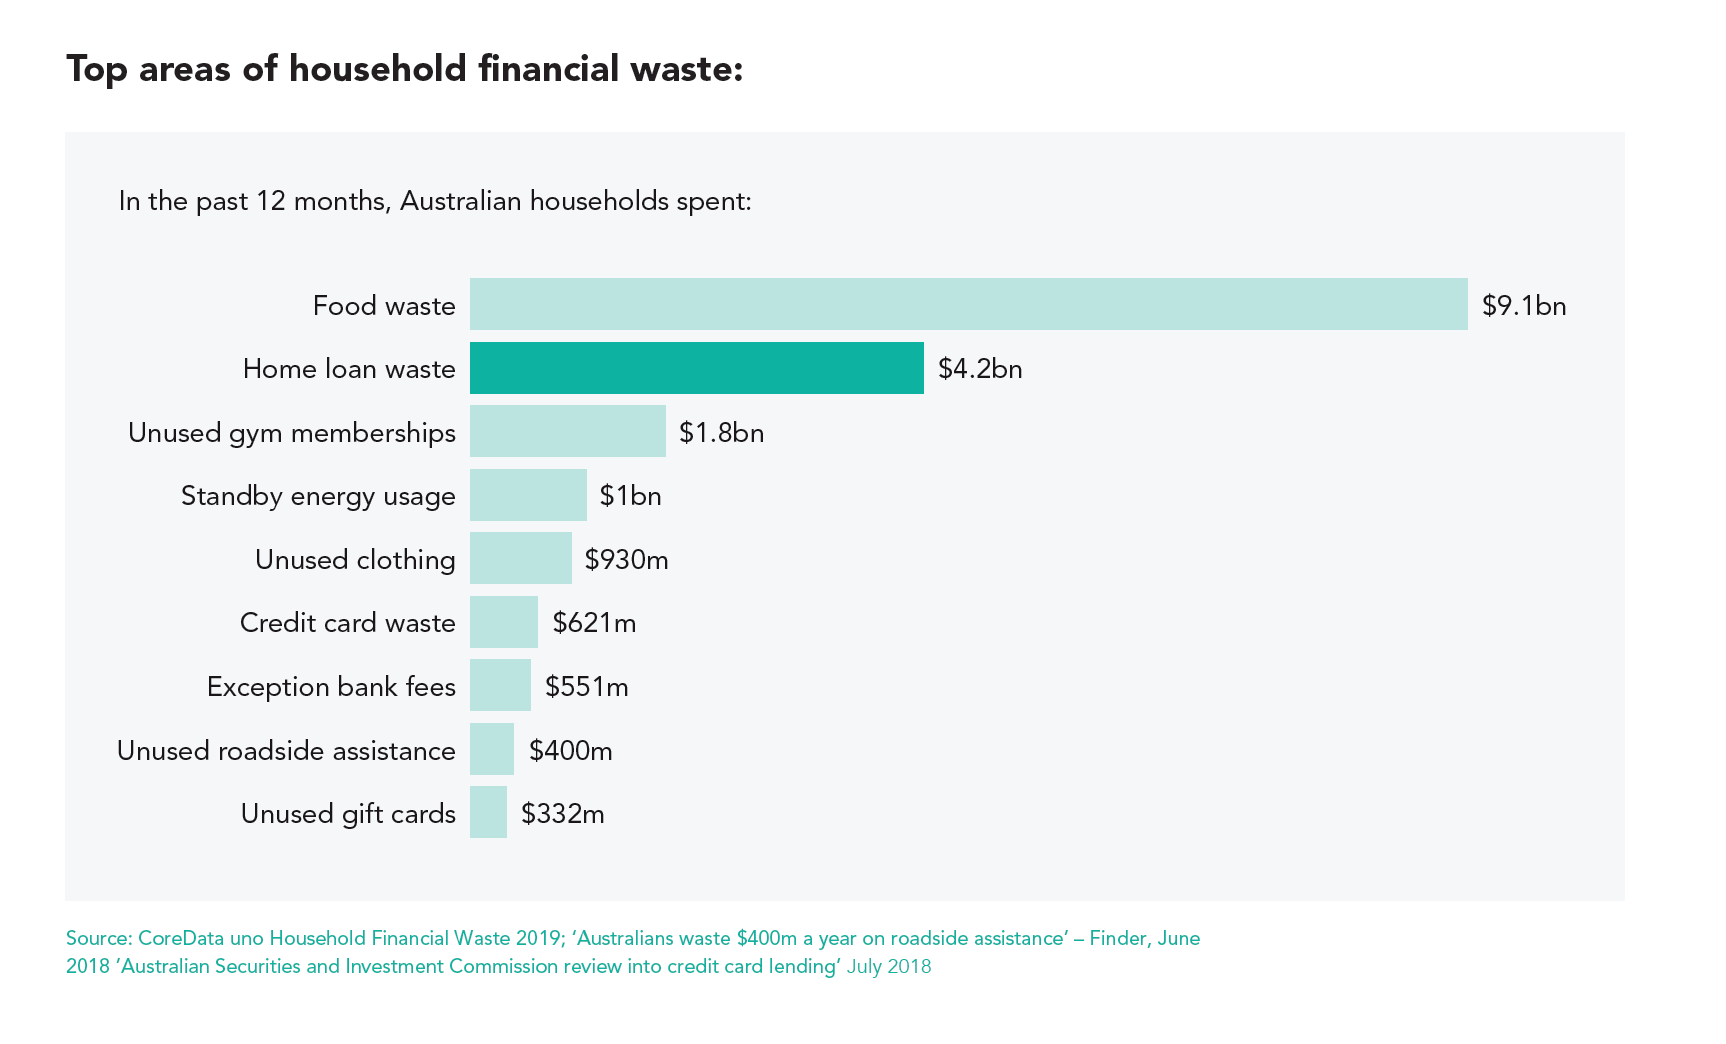 Top areas of household financial waste